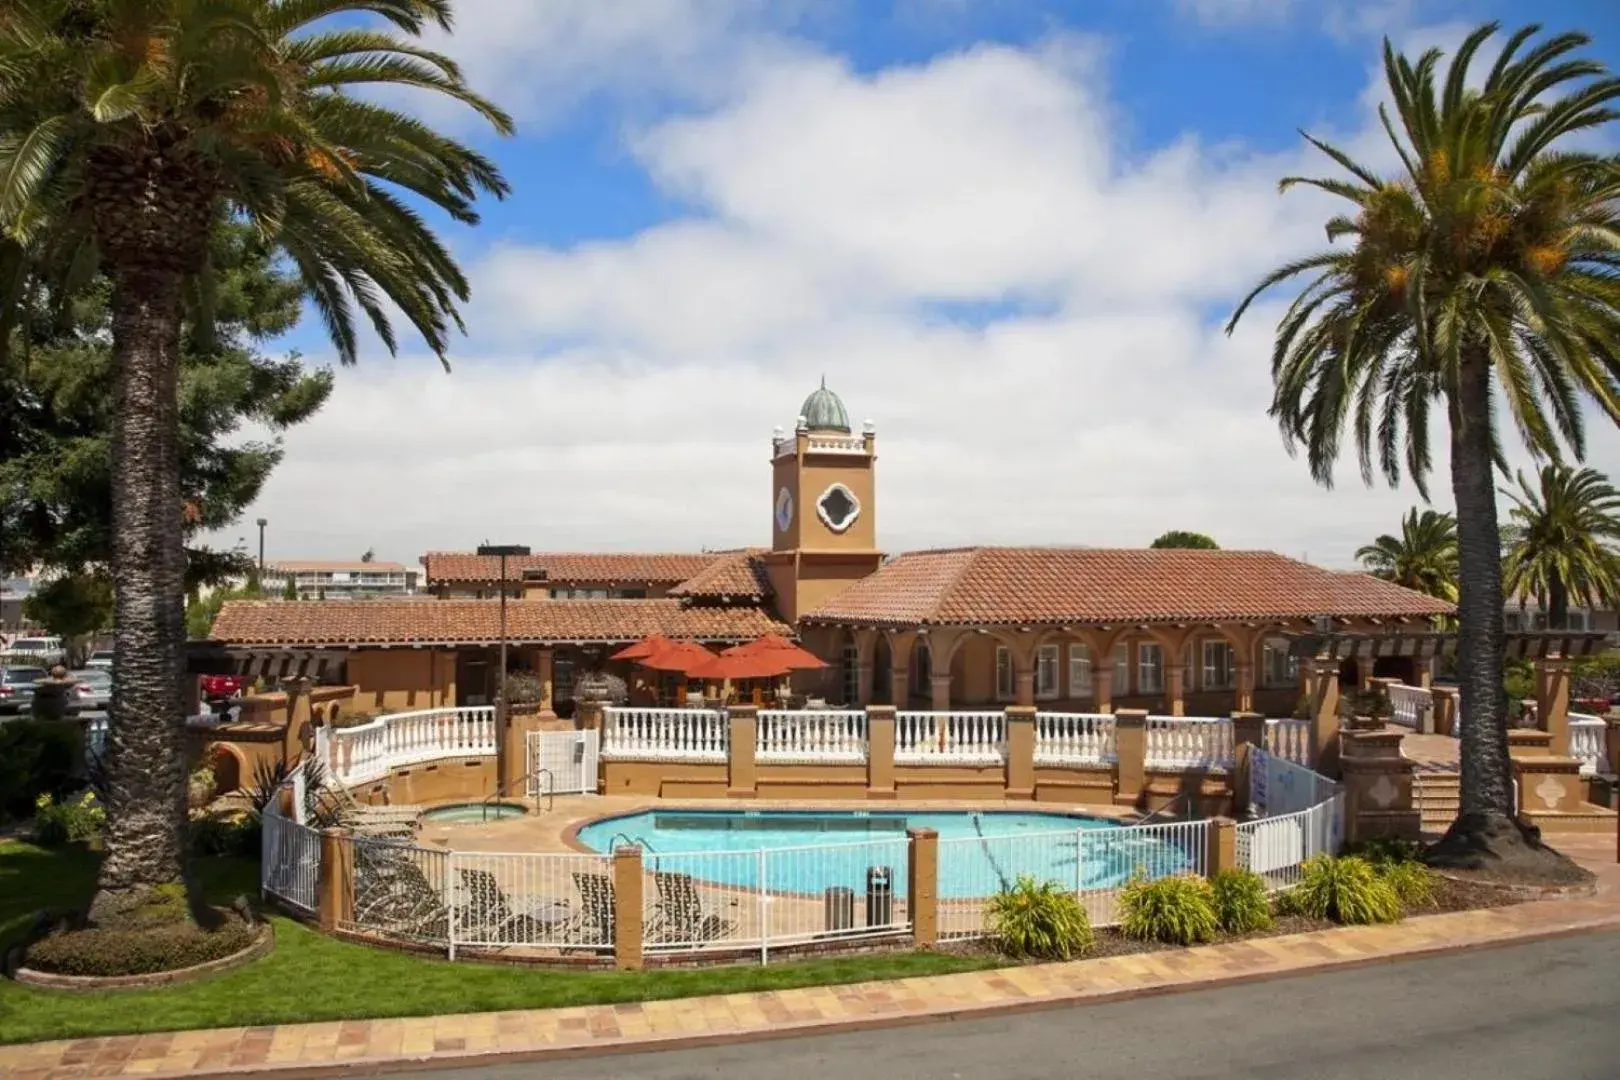 Property building, Swimming Pool in SFO El Rancho Inn, SureStay Collection by Best Western